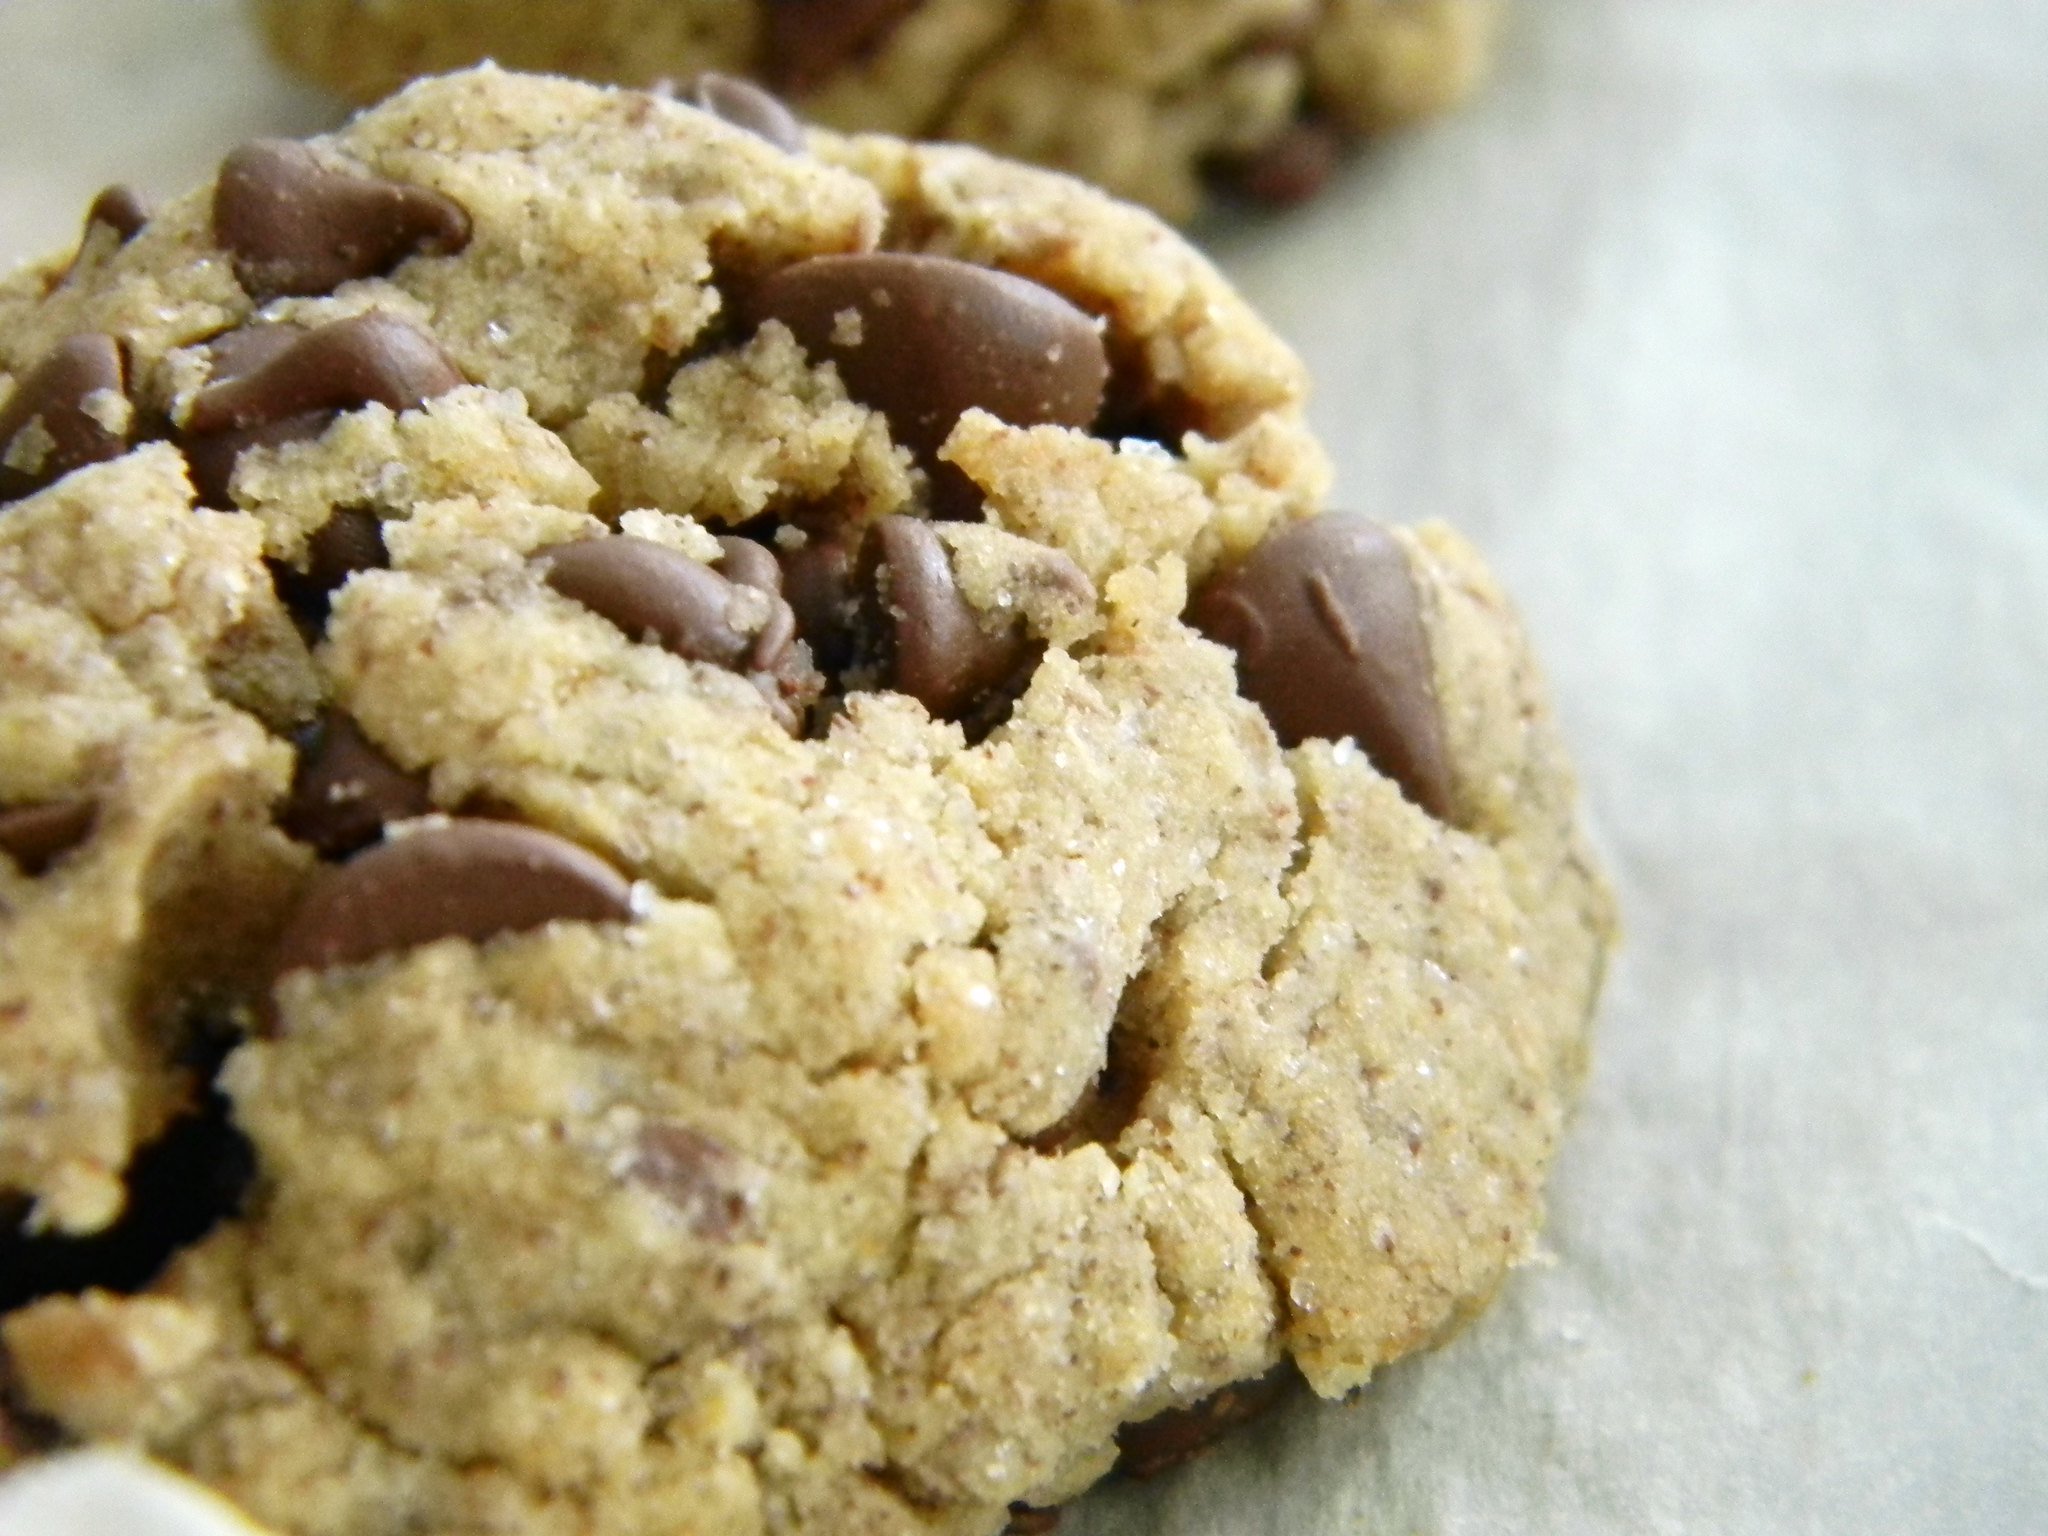 Yummy and crunchy gluten and nut-free vegan cookies on February 11, 2011 | Photo: Flickr/Sarah R